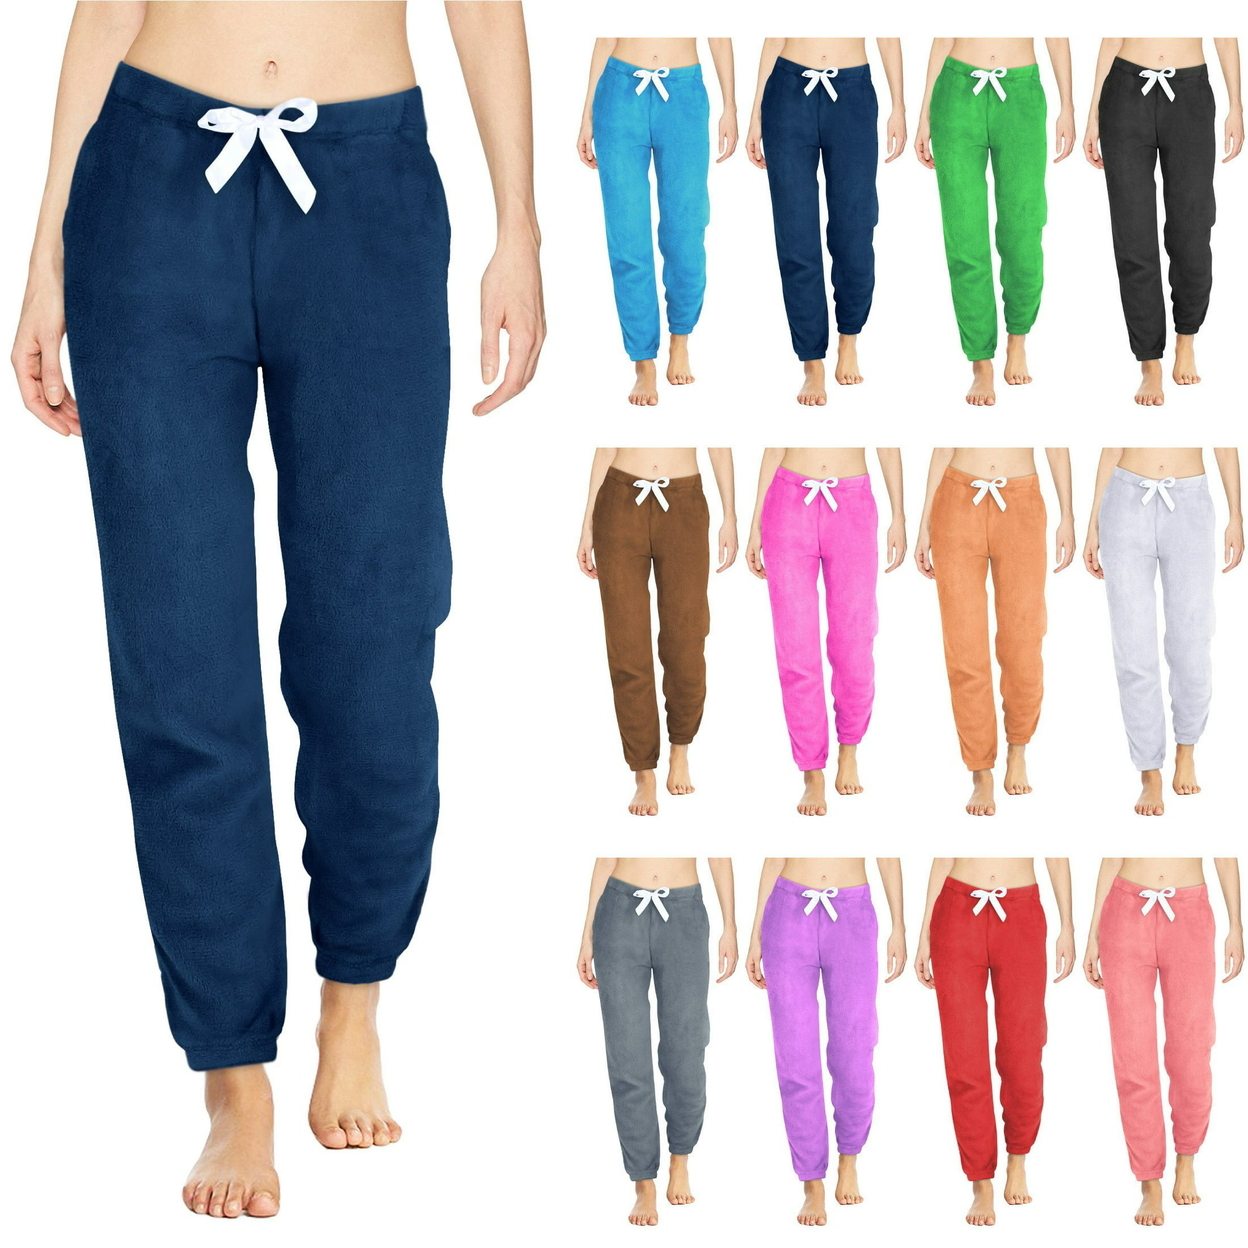 Multi-Pack: Women's Solid & Printed Ultra-Soft Comfy Stretch Micro-Fleece Pajama Lounge Pants - 1-pack, X-large, Animal